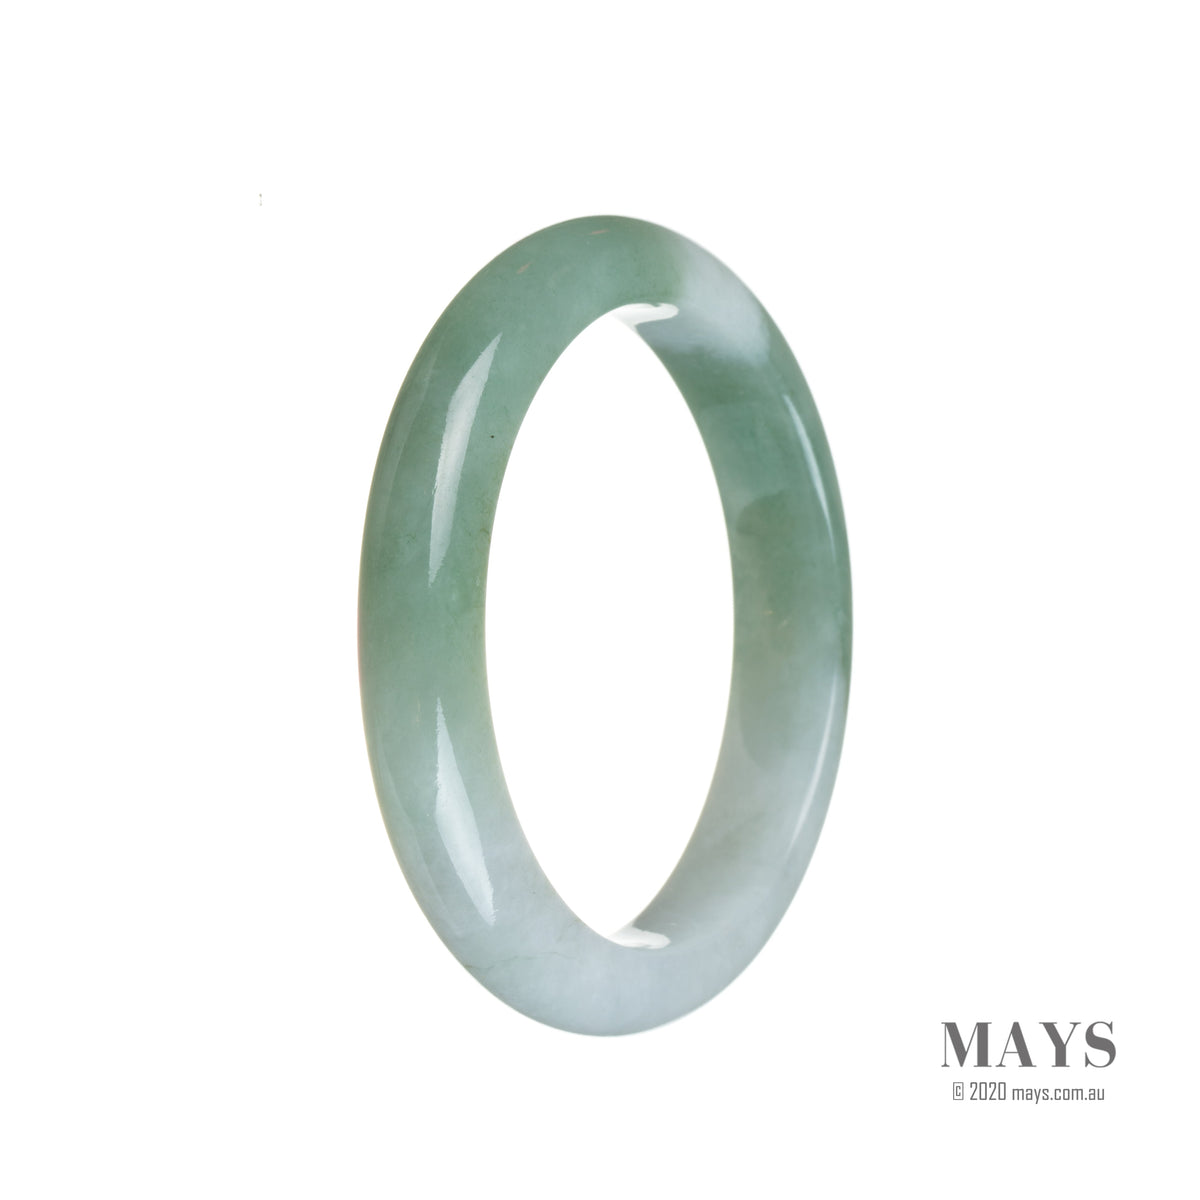 A half moon-shaped pale lavender jade bangle with green spots, made of authentic untreated traditional jade.